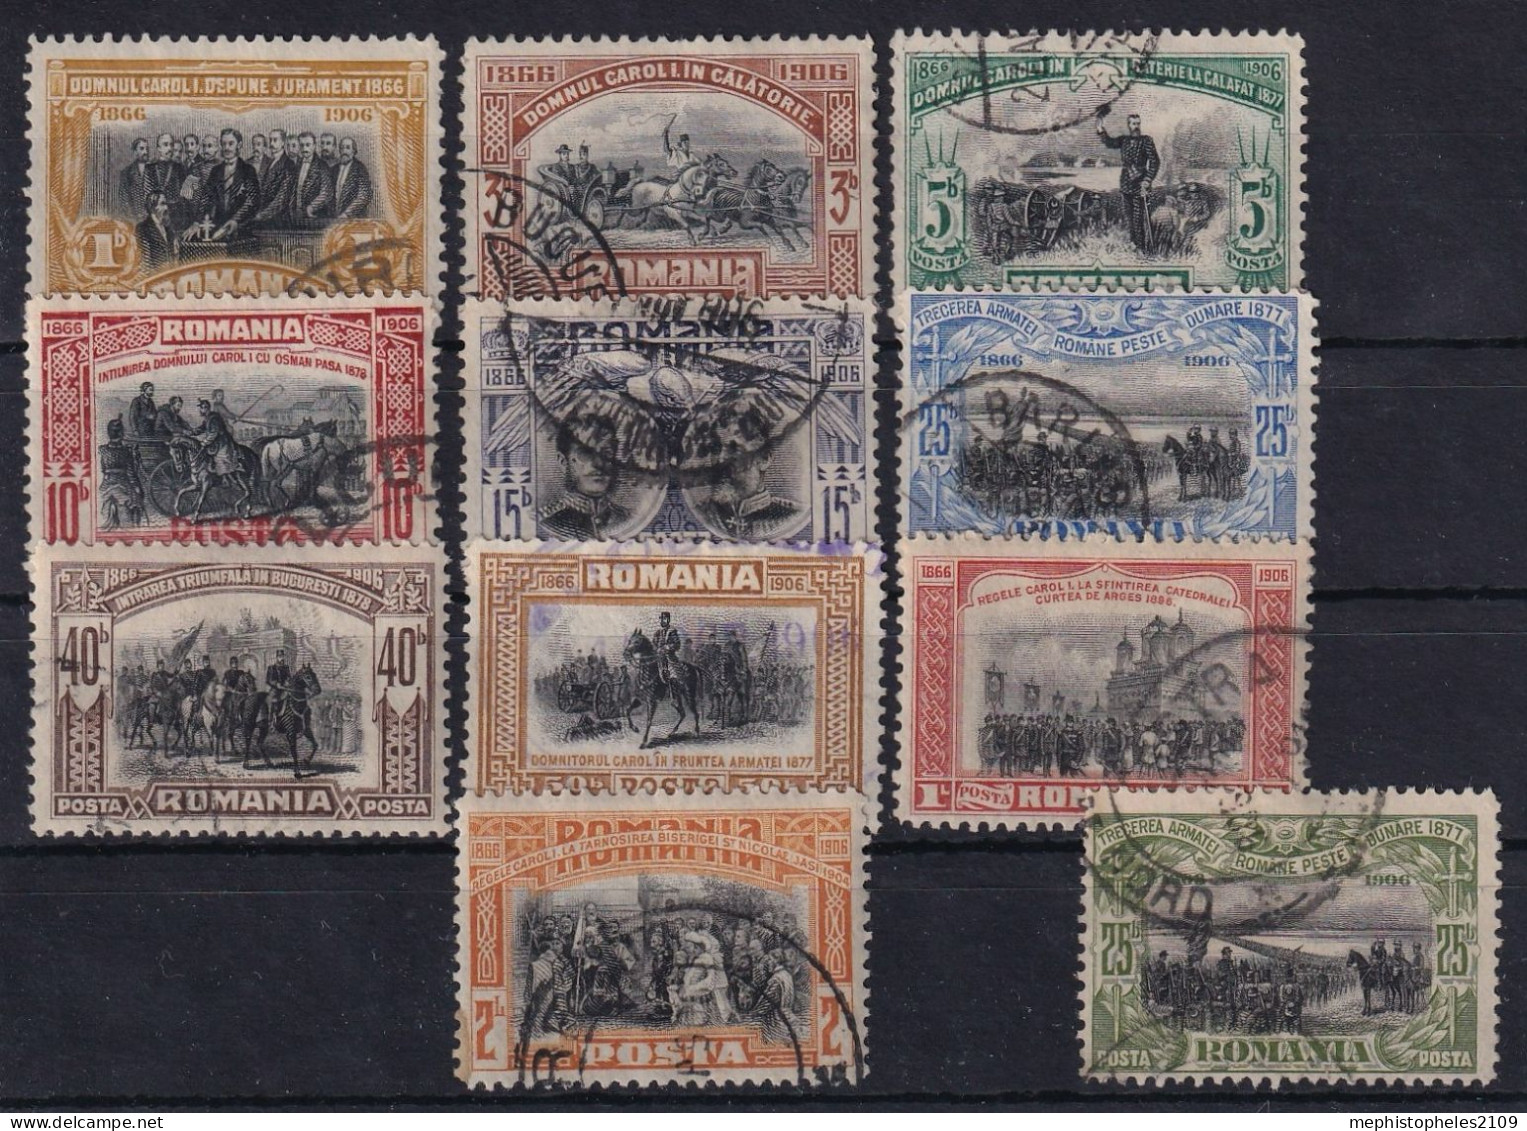 ROMANIA 1906 - Canceled - Sc# 176-185, 181a - Used Stamps